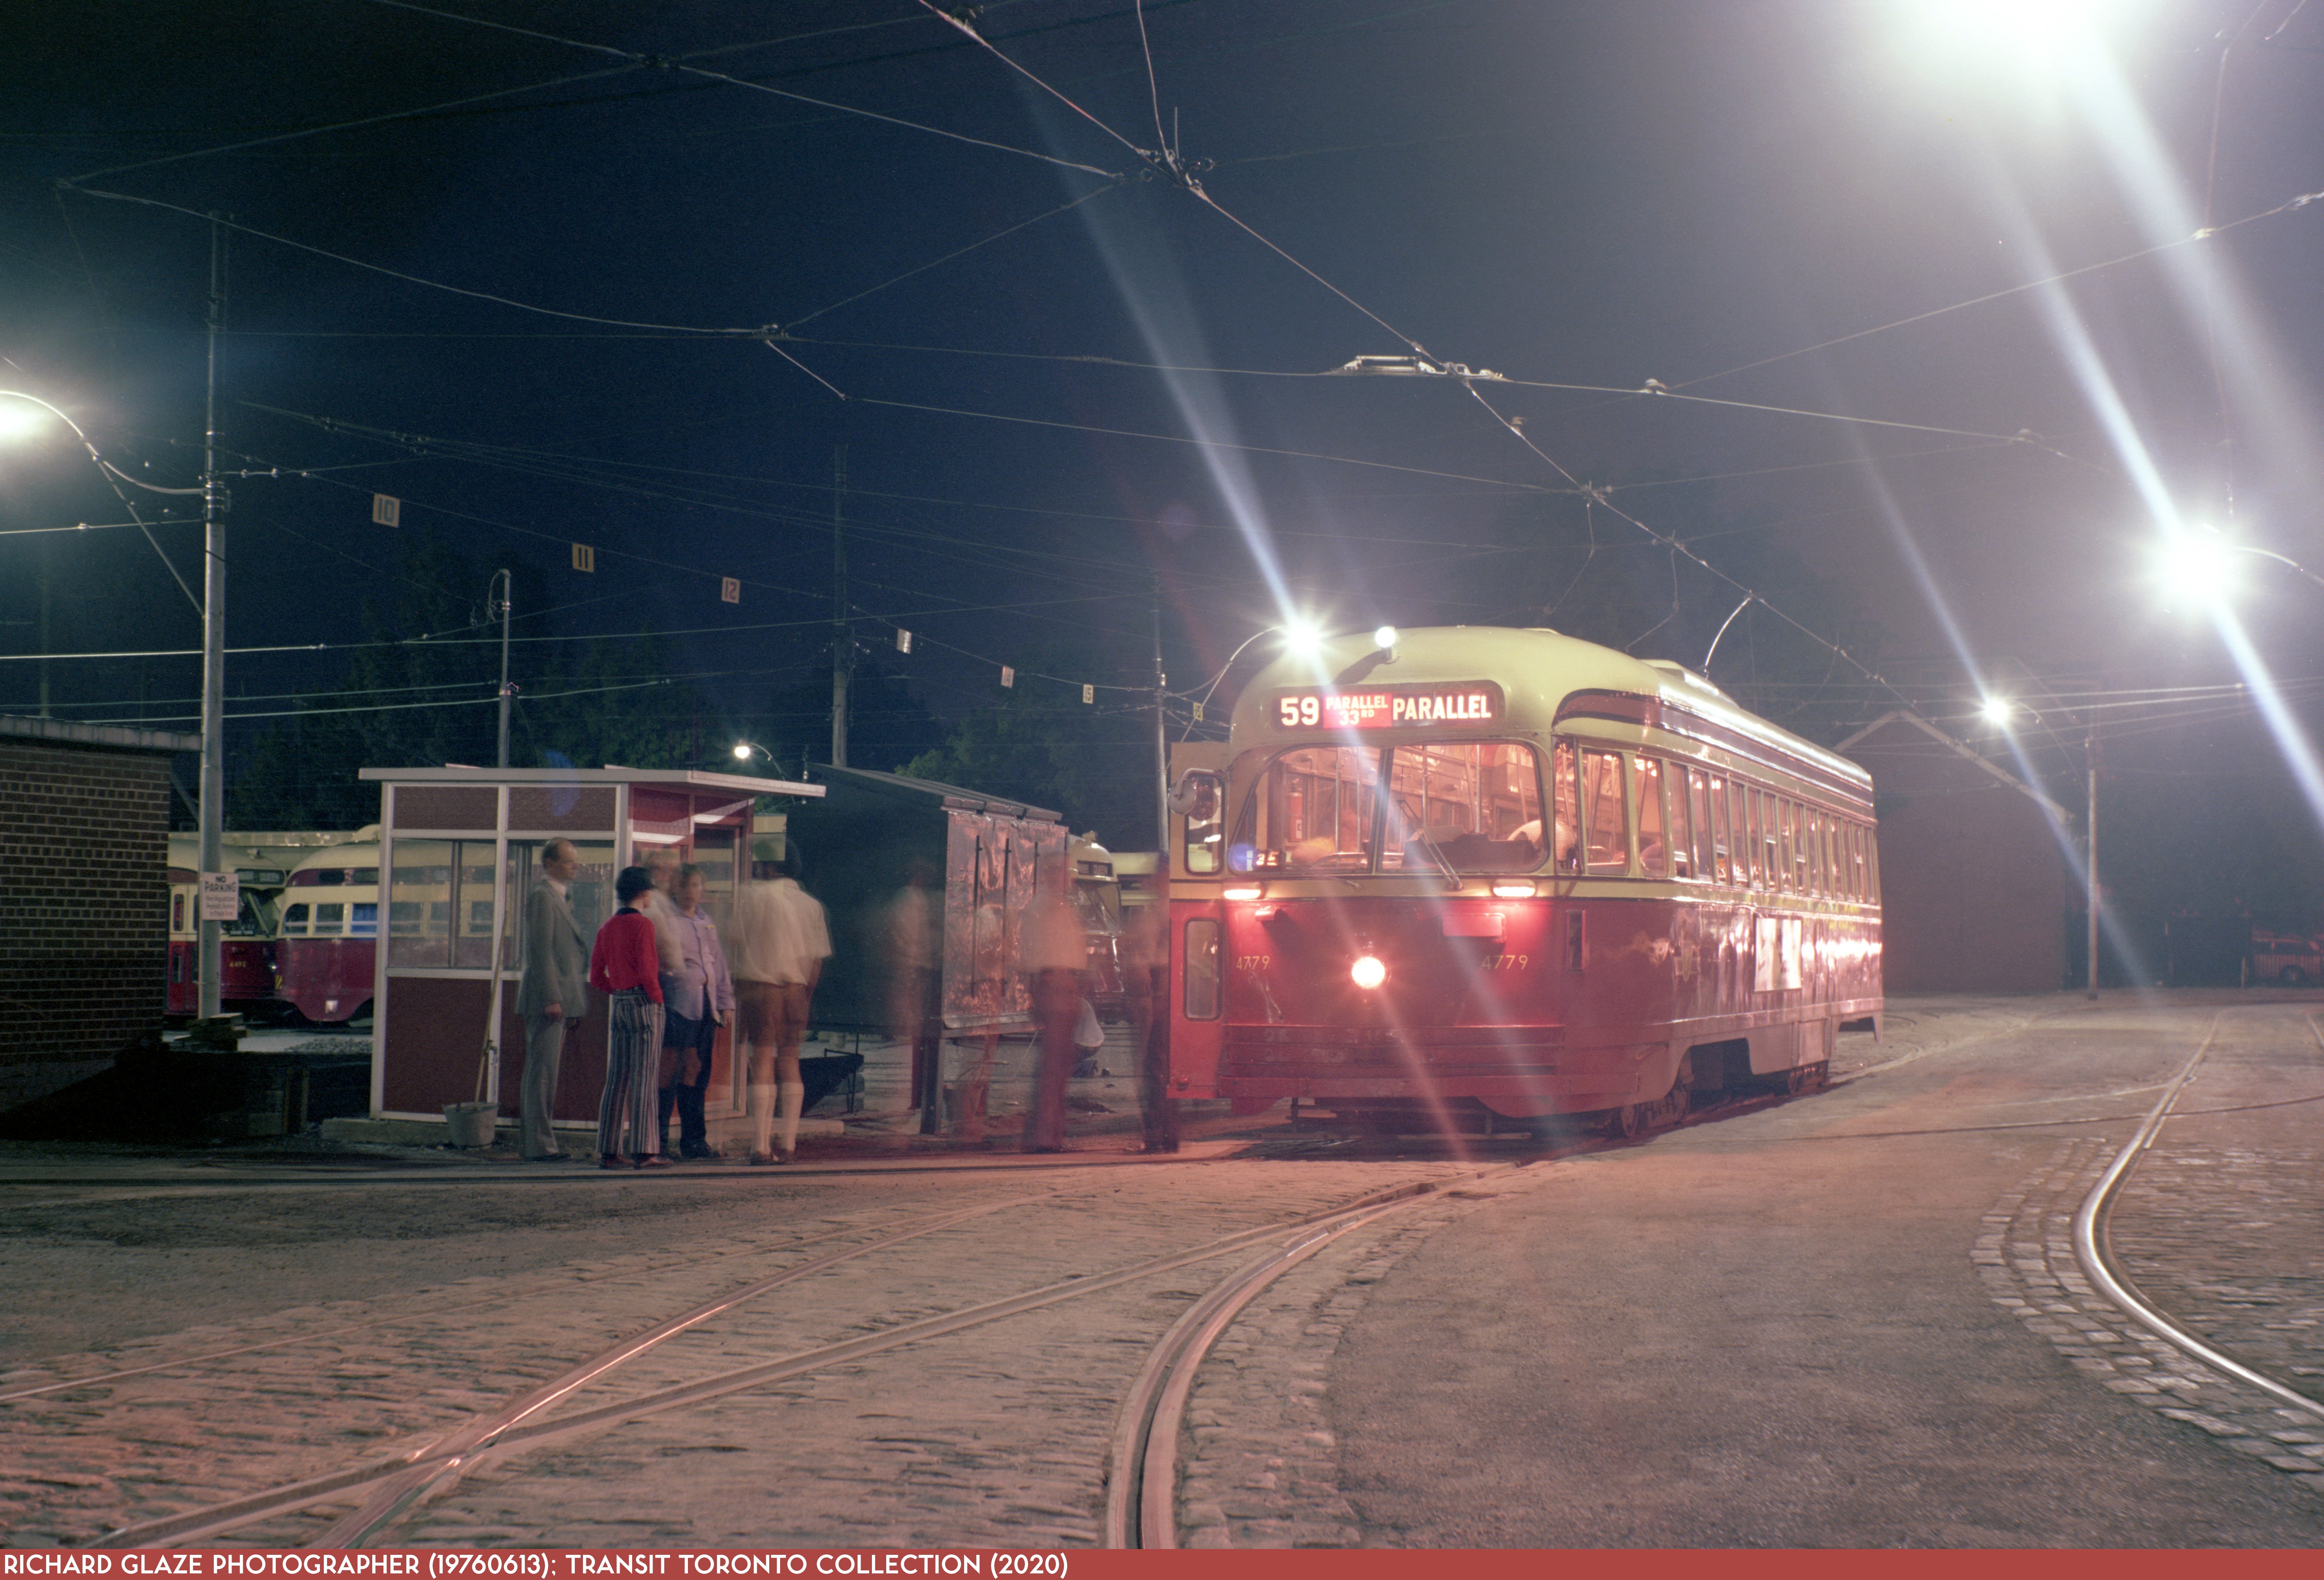 19760613 - Kansas City 4779 Charter - 2300 at Russell Carhouse